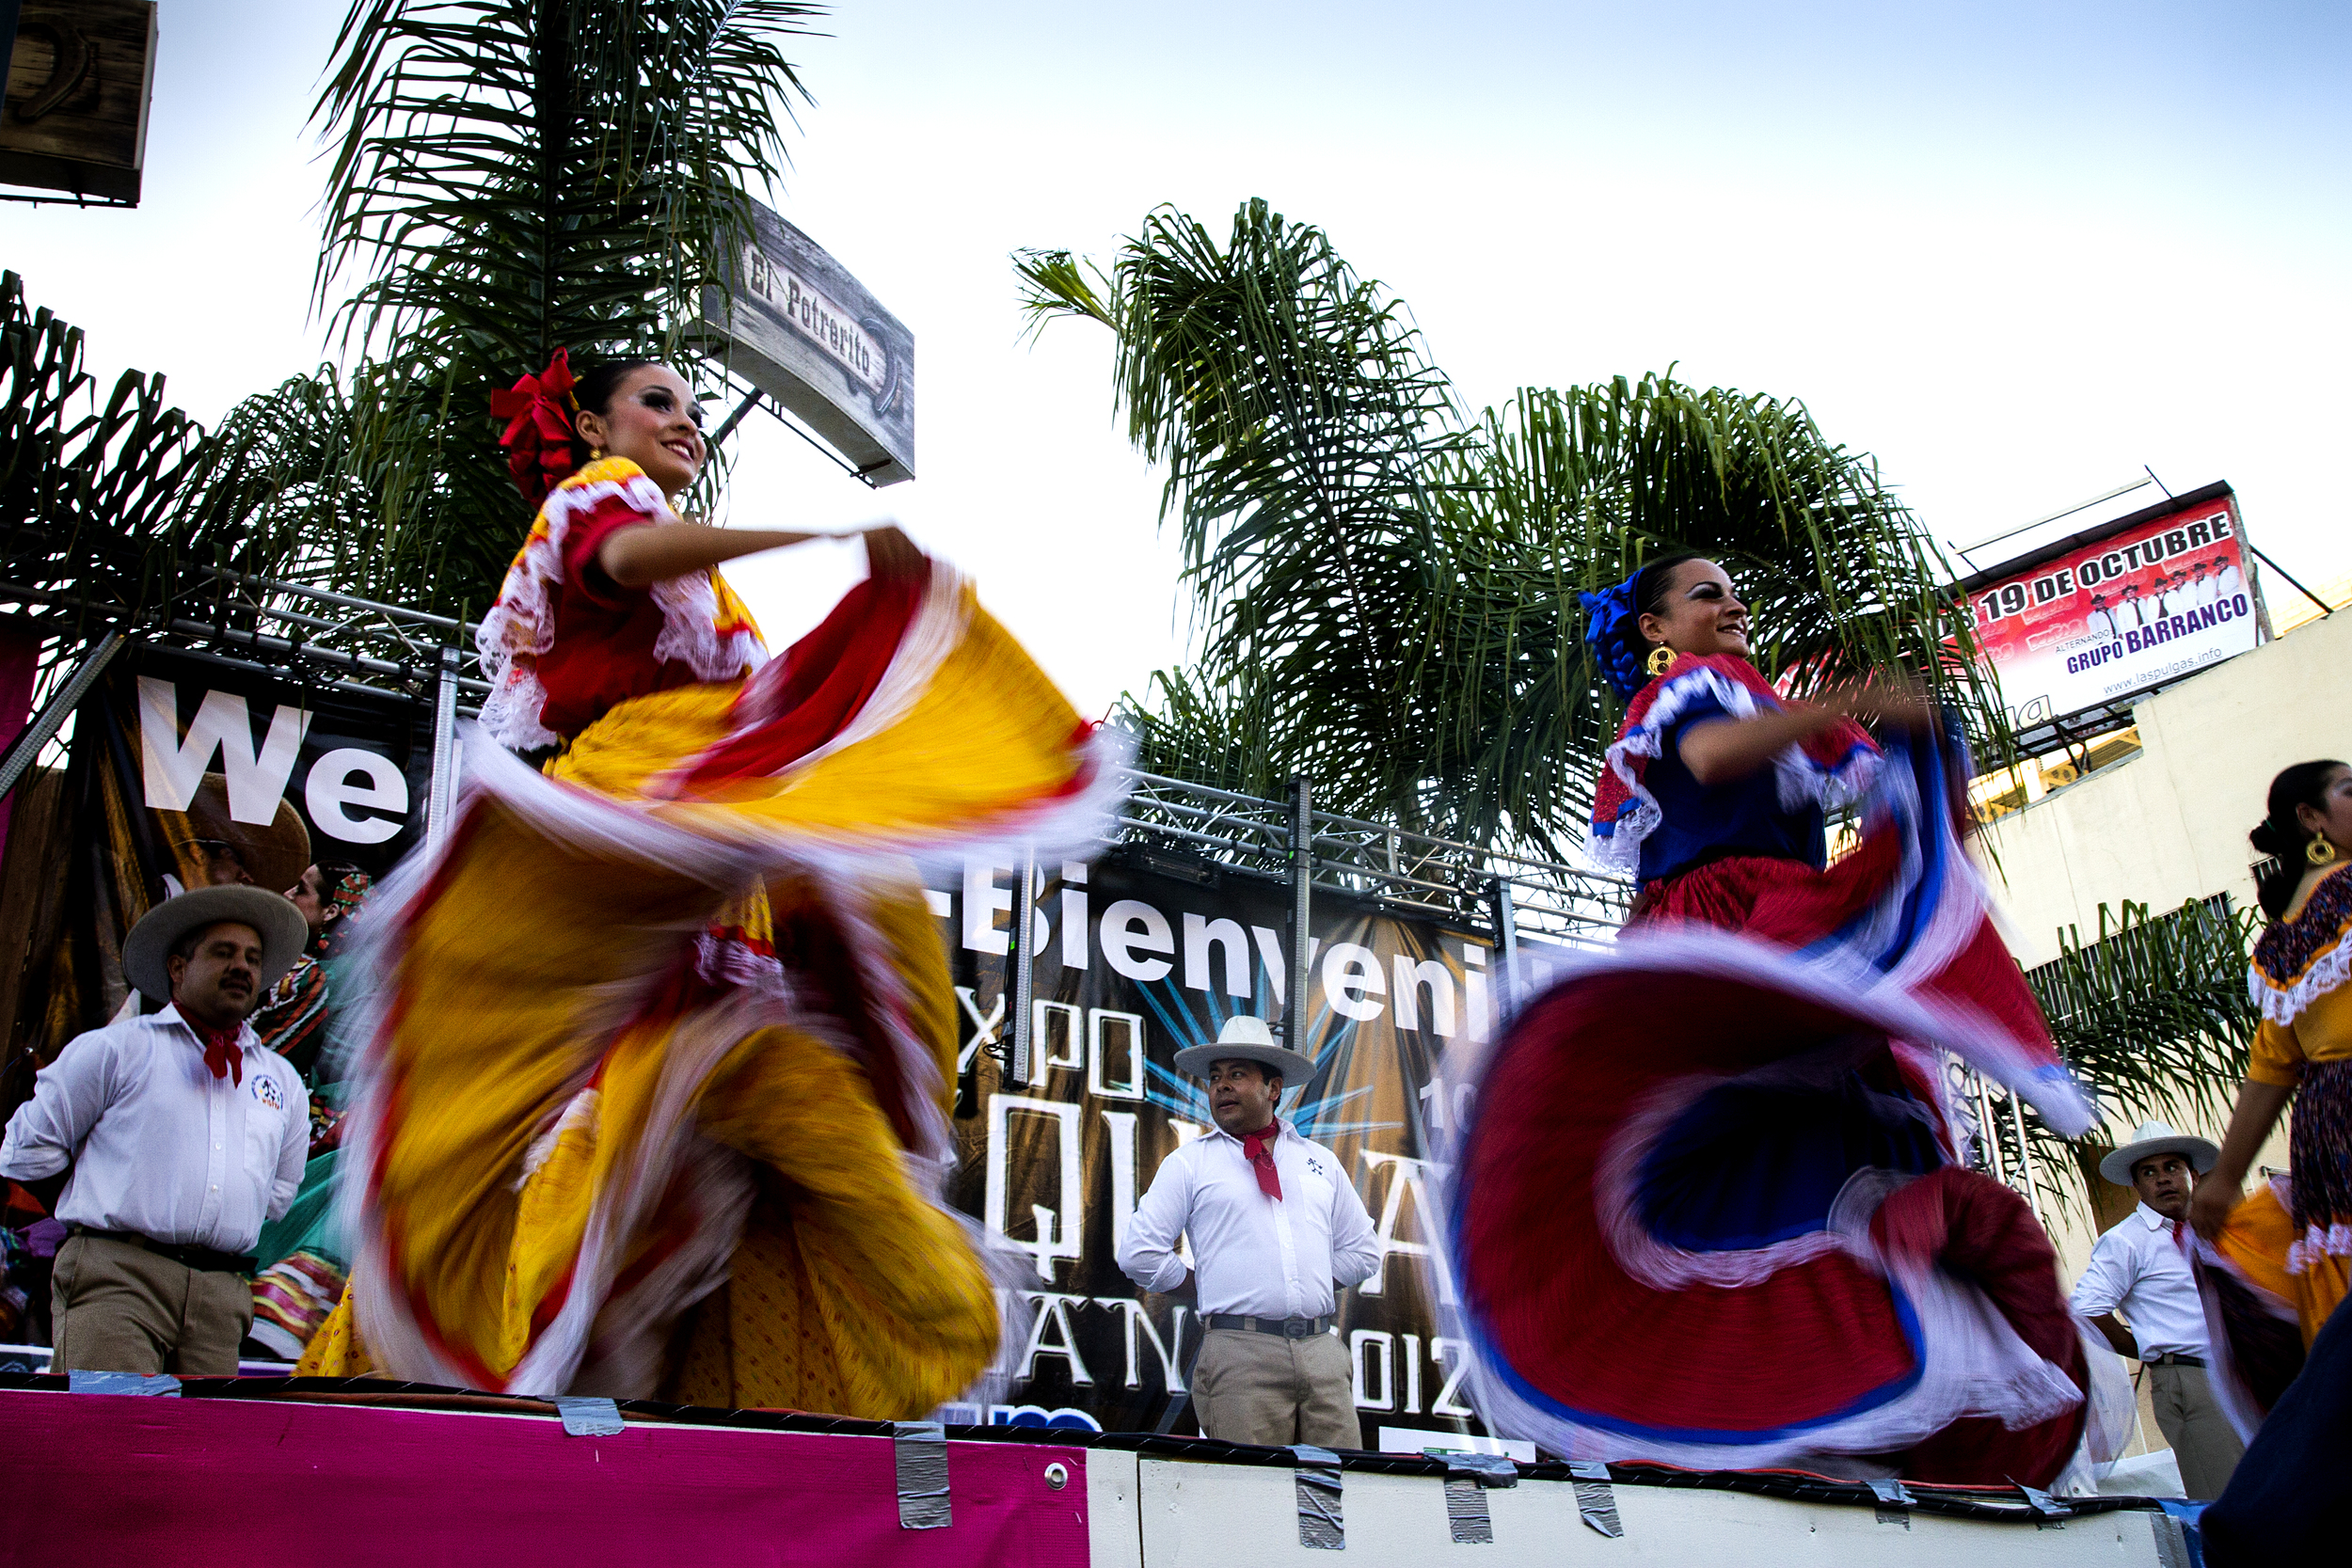  Folklorico dancers at the tequila festival​ 